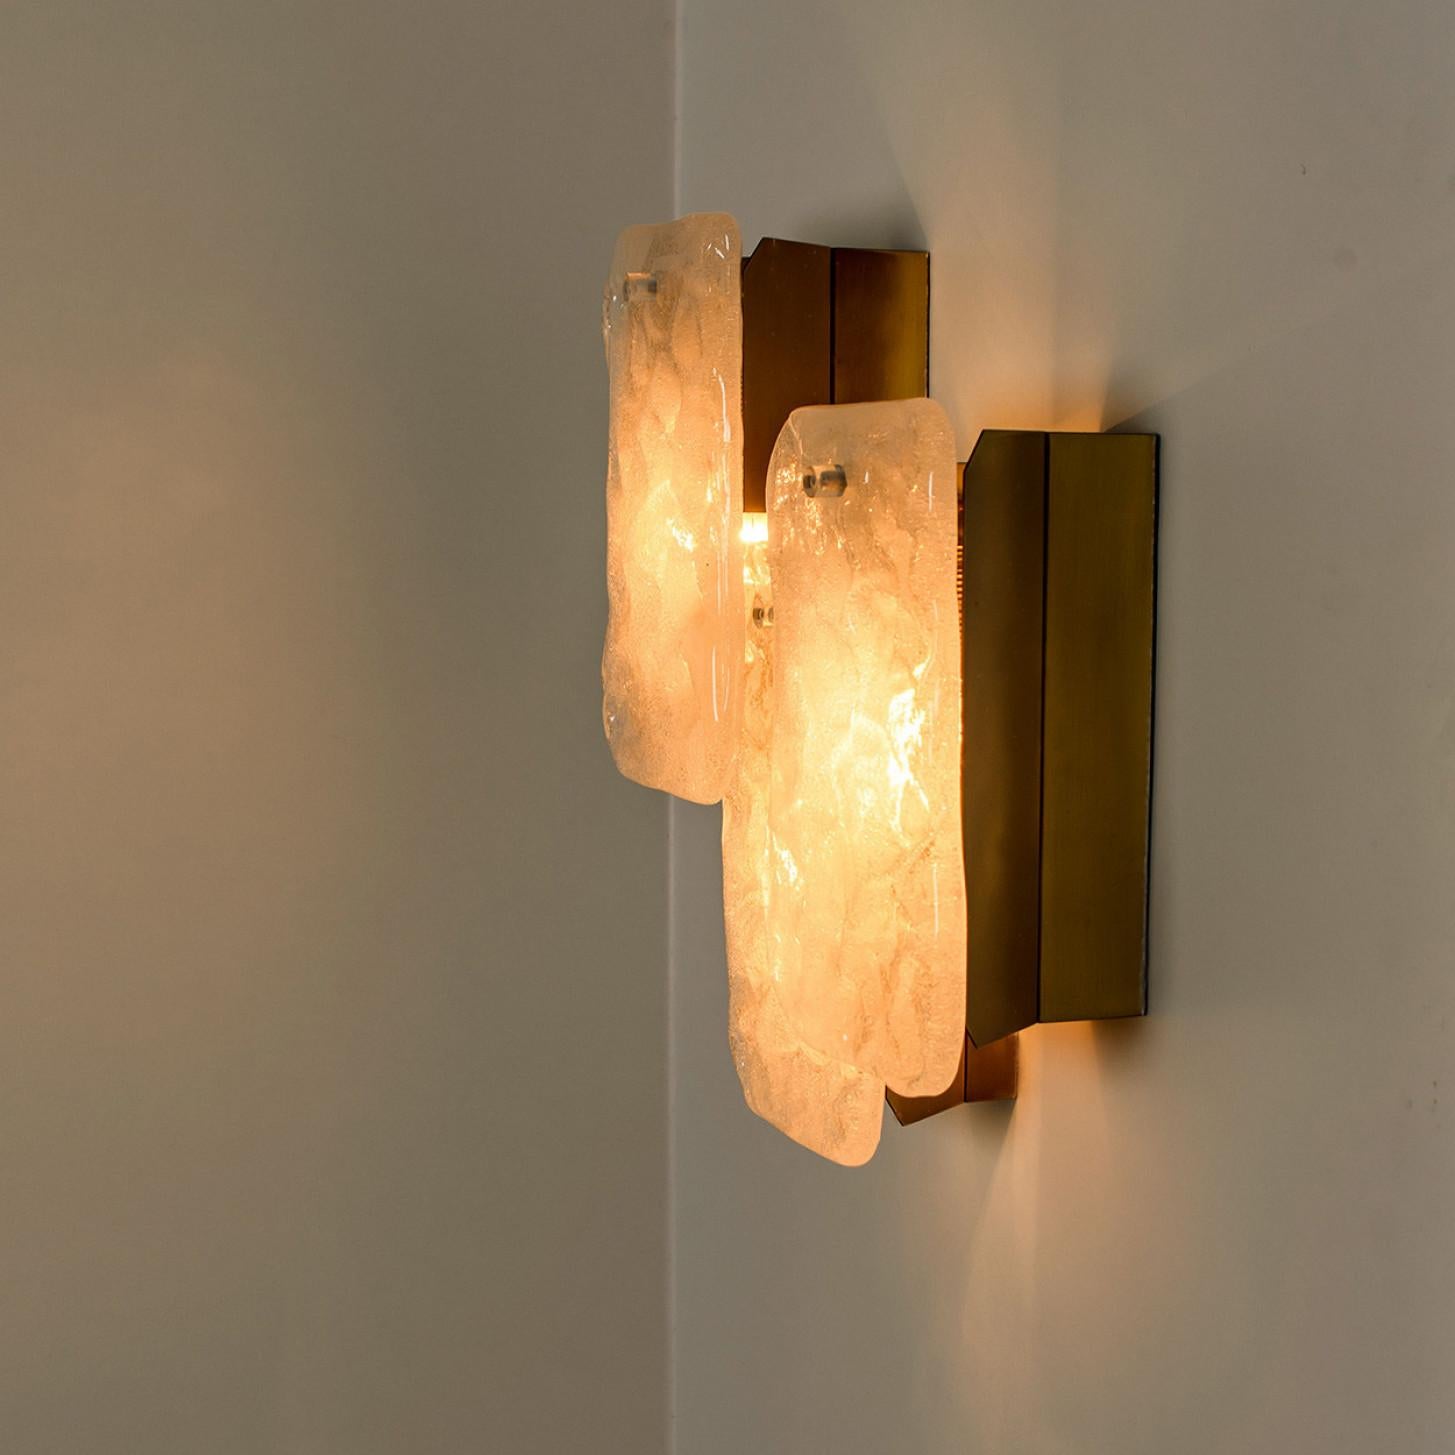 1 of the 2 Glass and Brass Light Fixture Designed by J.T Kalmar, Austria, 1960s For Sale 2